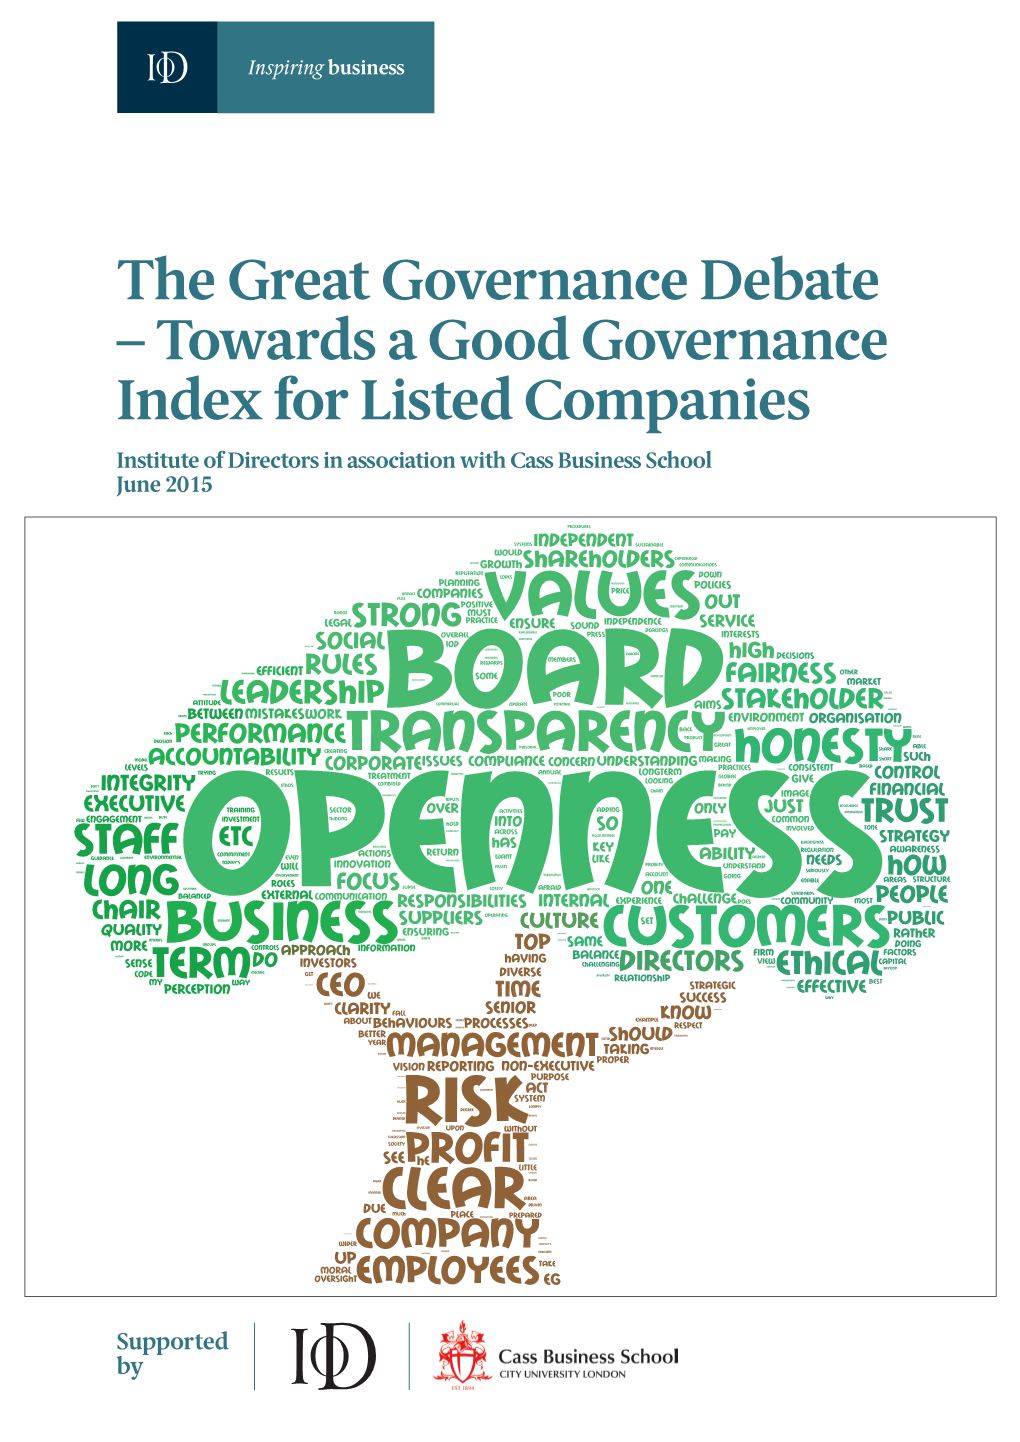 Towards a Good Governance Index for Listed Companies Institute of Directors in Association with Cass Business School June 2015